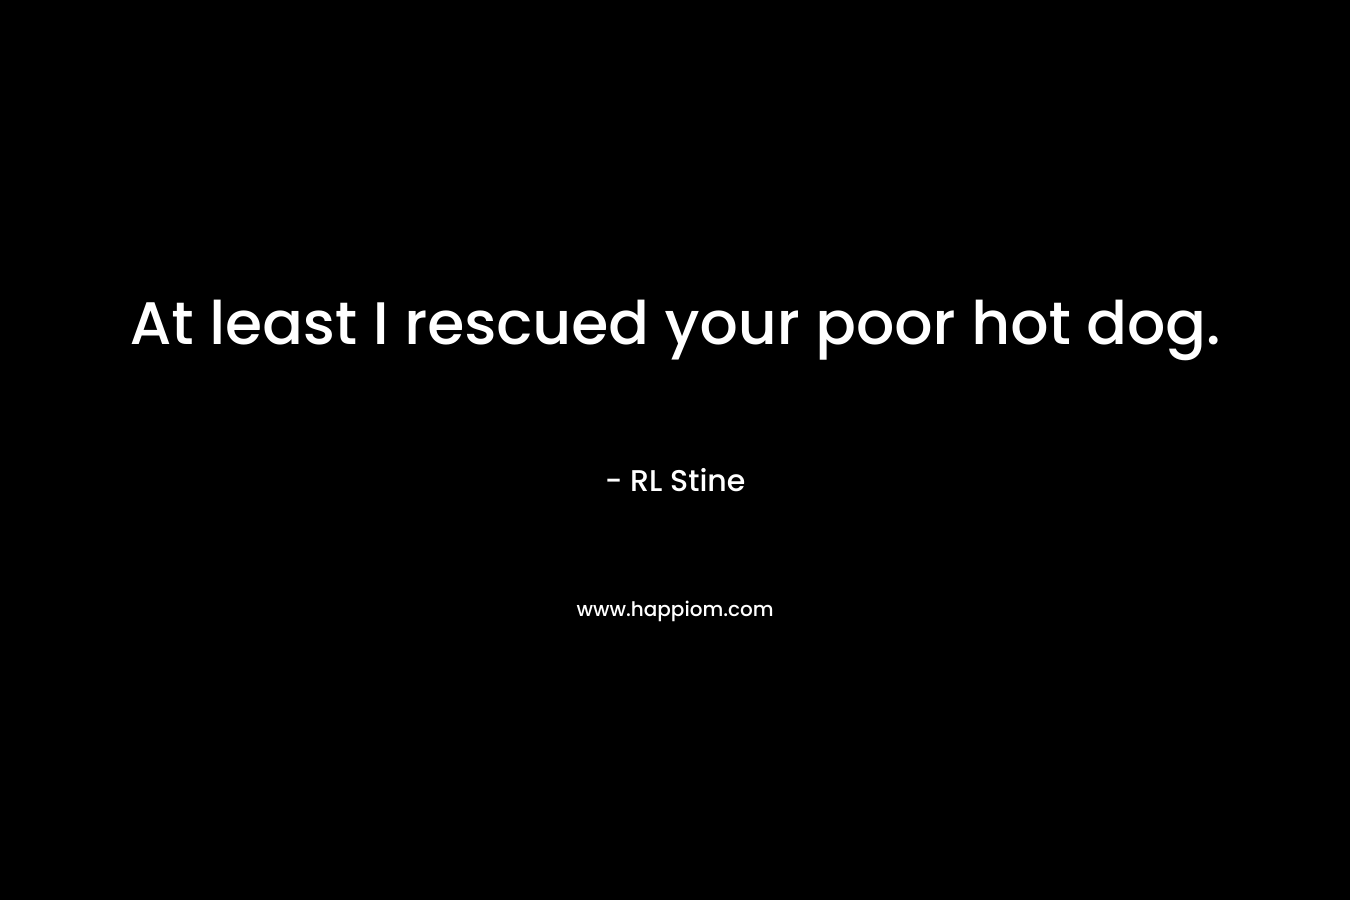 At least I rescued your poor hot dog. – RL Stine